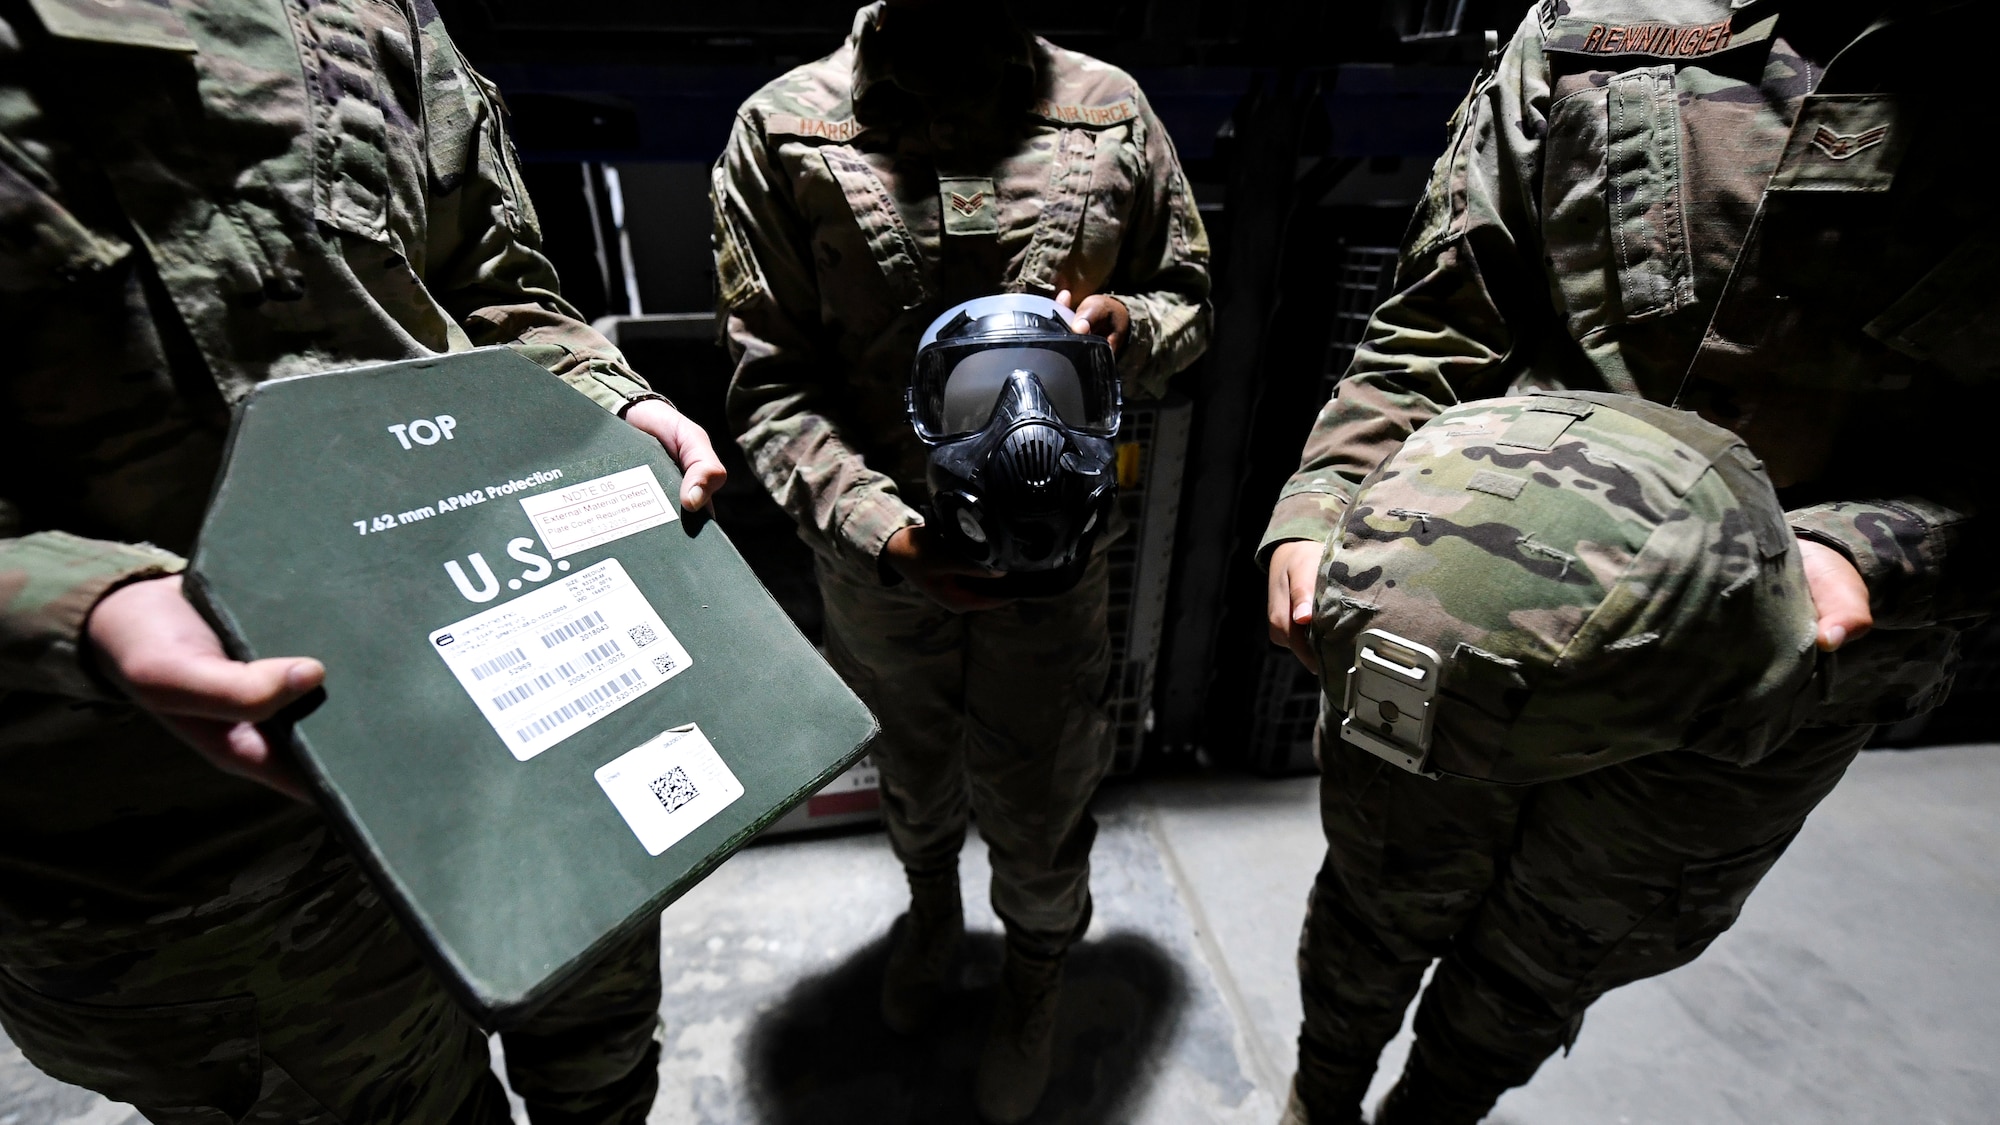 Airmen with the 386th Expeditionary Logistics Readiness Squadron expeditionary theater distribution center showcase some of the items stocked in the facility at Ali Al Salem Air Base, Kuwait, Aug. 13, 2019. The theater distribution center packs a variety of items to include body armor, advanced combat helmets, ballistics plates and other chemical warfare defense items. (U.S. Air Force photo by Staff Sgt. Mozer O. Da Cunha)